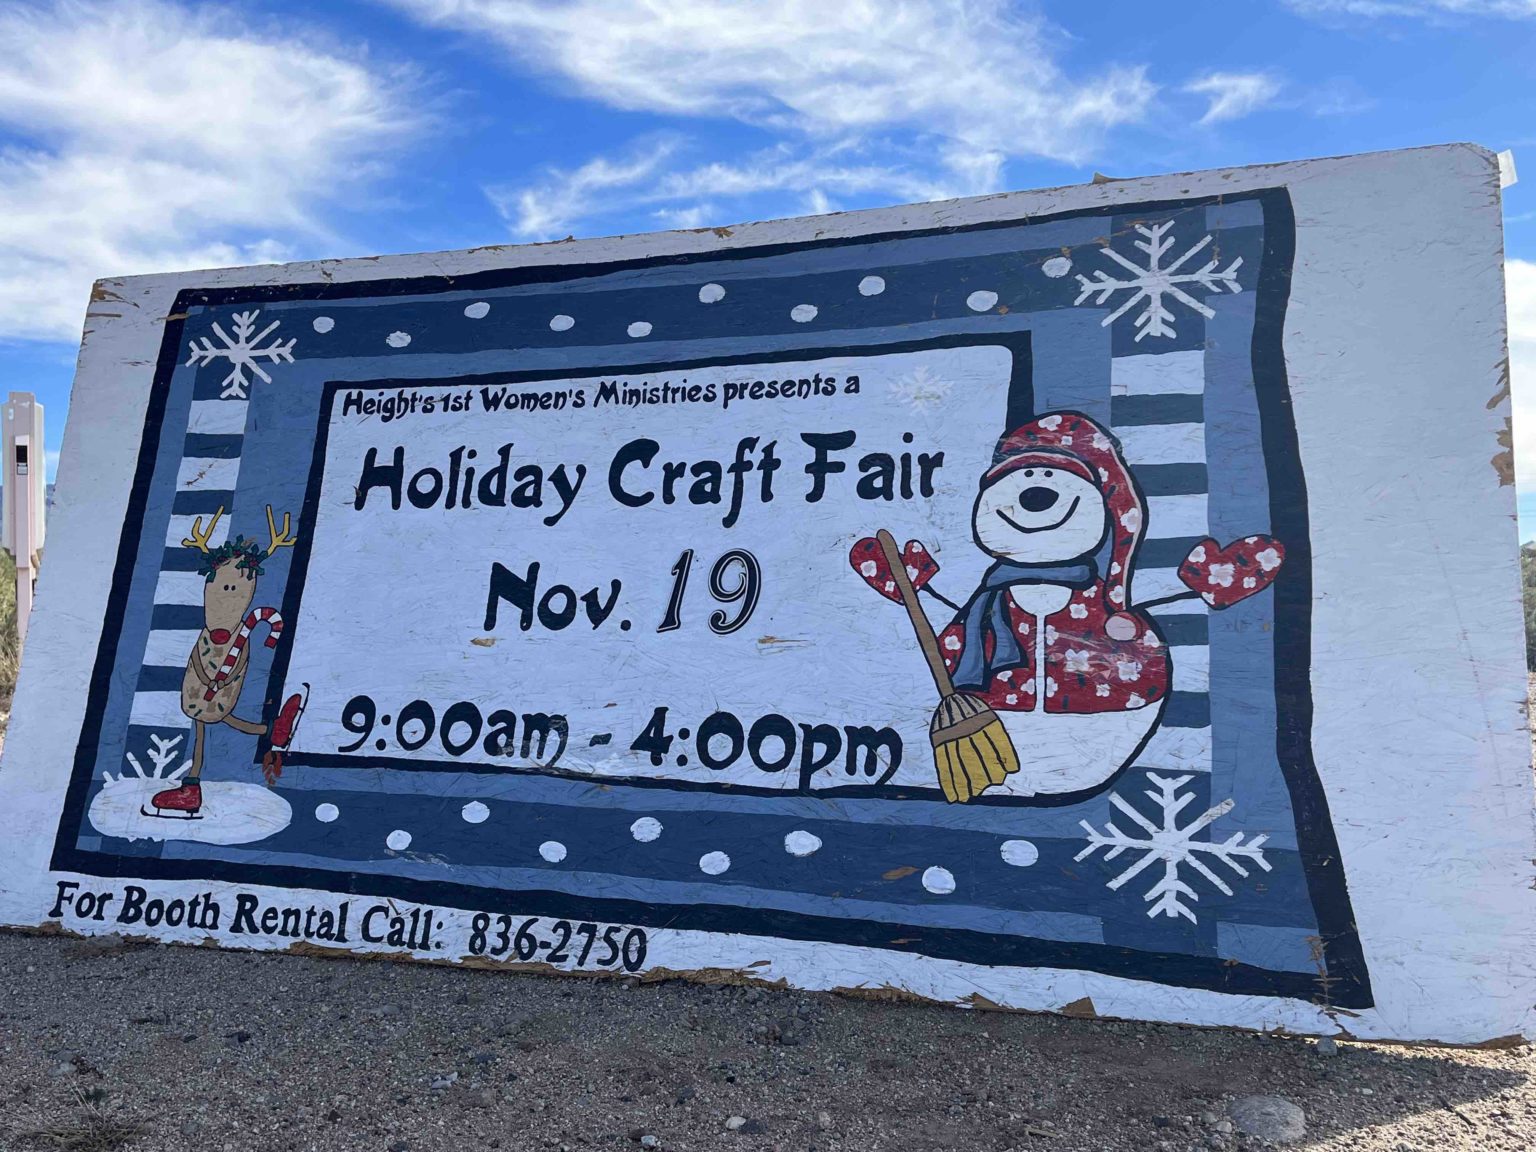 A sign for the Heights First Church of the Nazarene Holiday Craft Fair